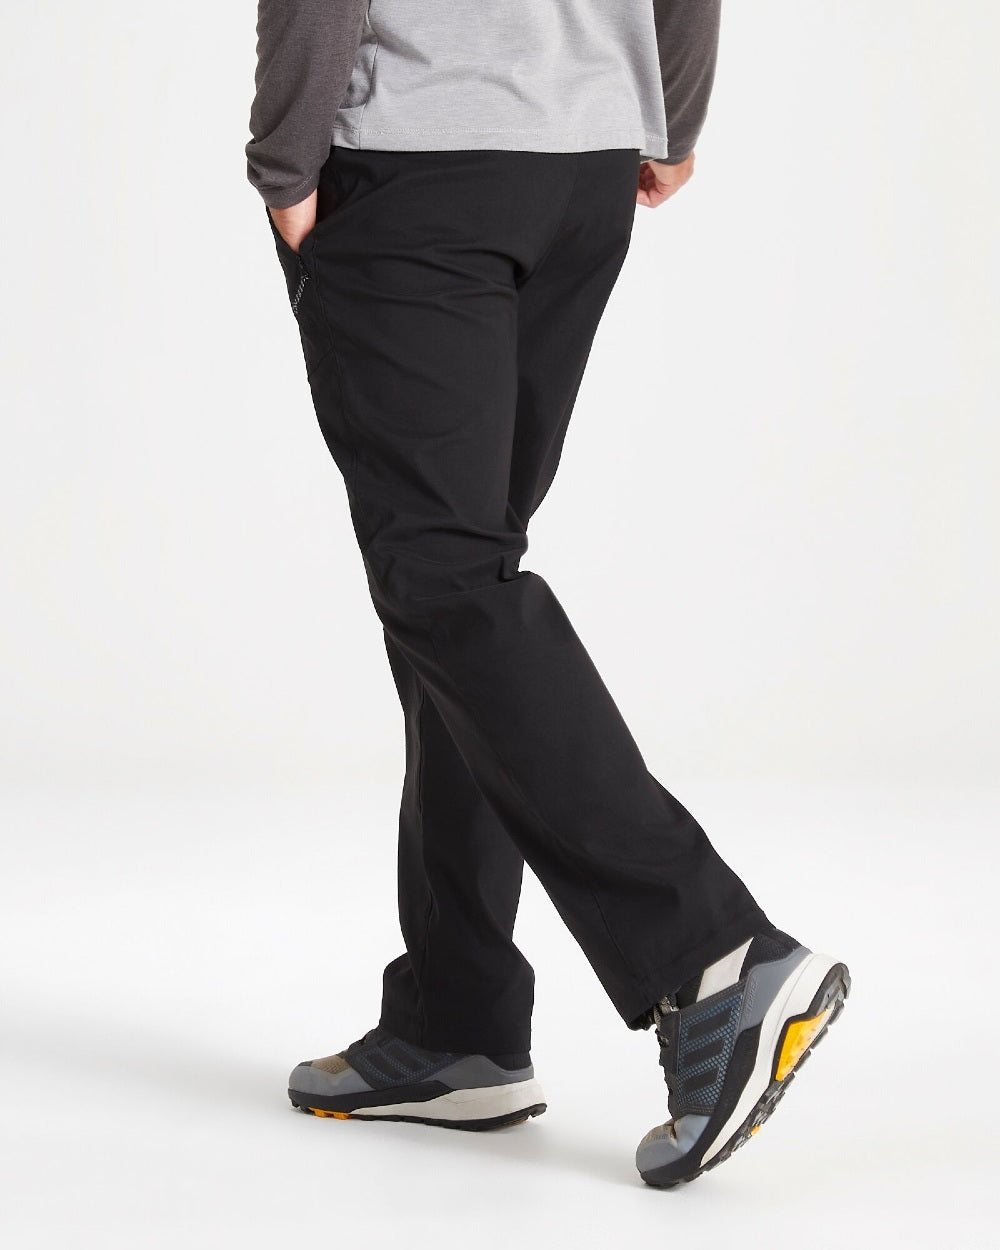 Black Coloured Craghoppers Mens Kiwi Pro II Trousers On A Grey Background 